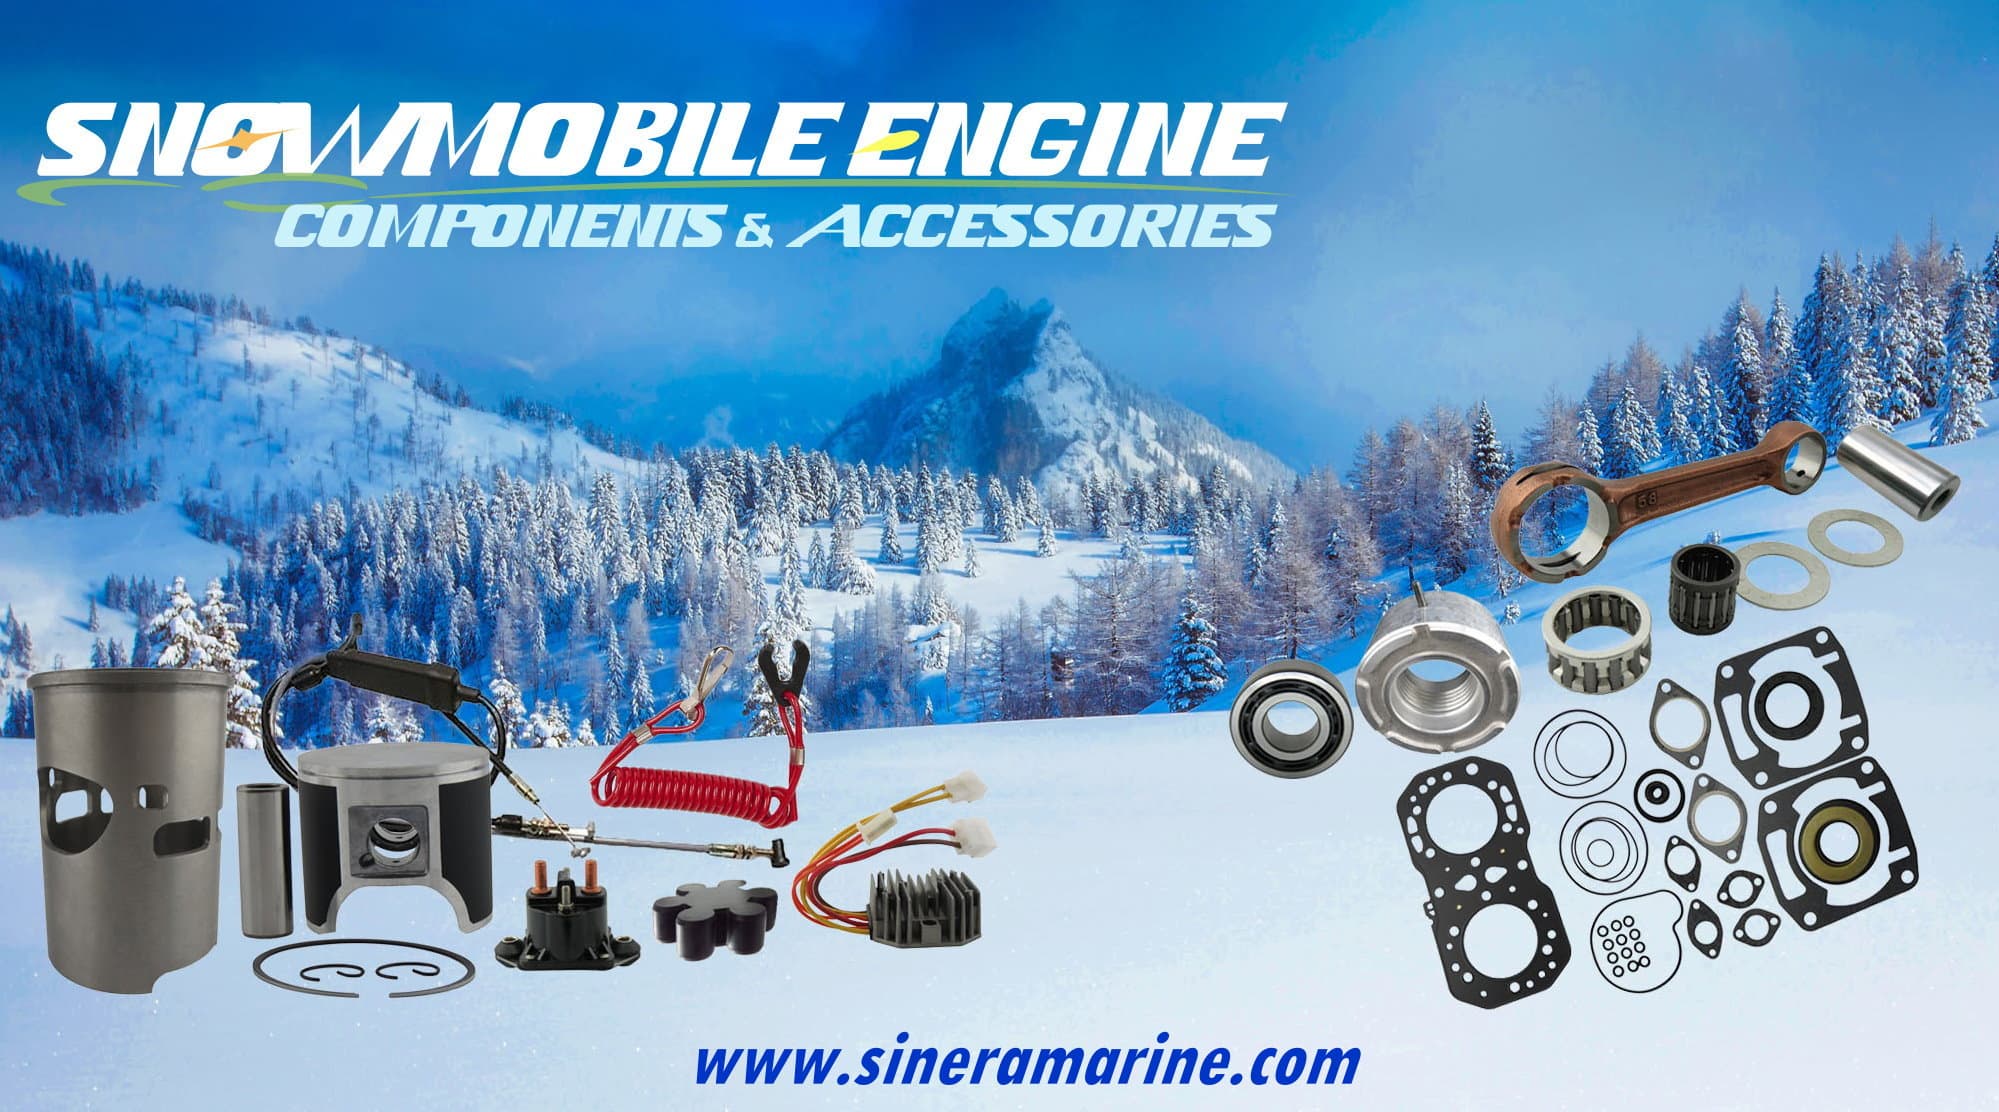 Snowmobile Snow scooter Parts manufacturer in Taiwan